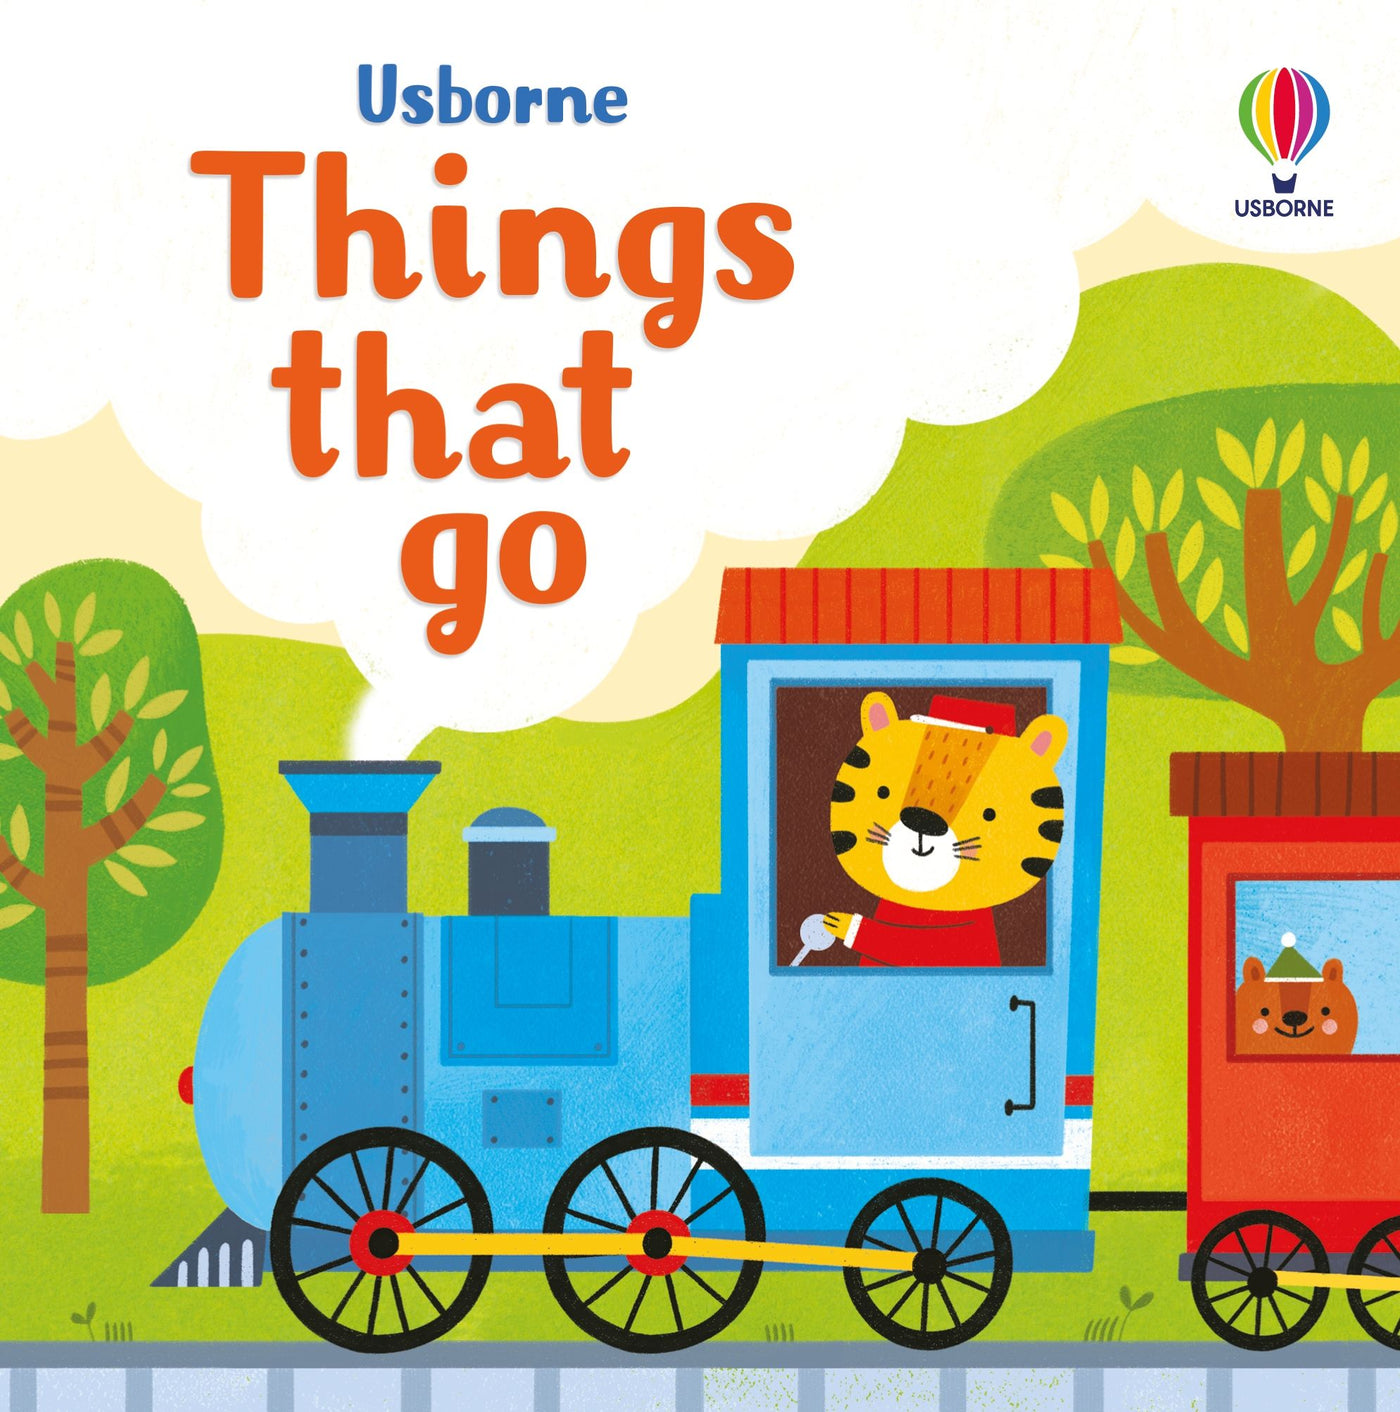 First Jigsaws And Book: Things that go - Board Book | Usborne